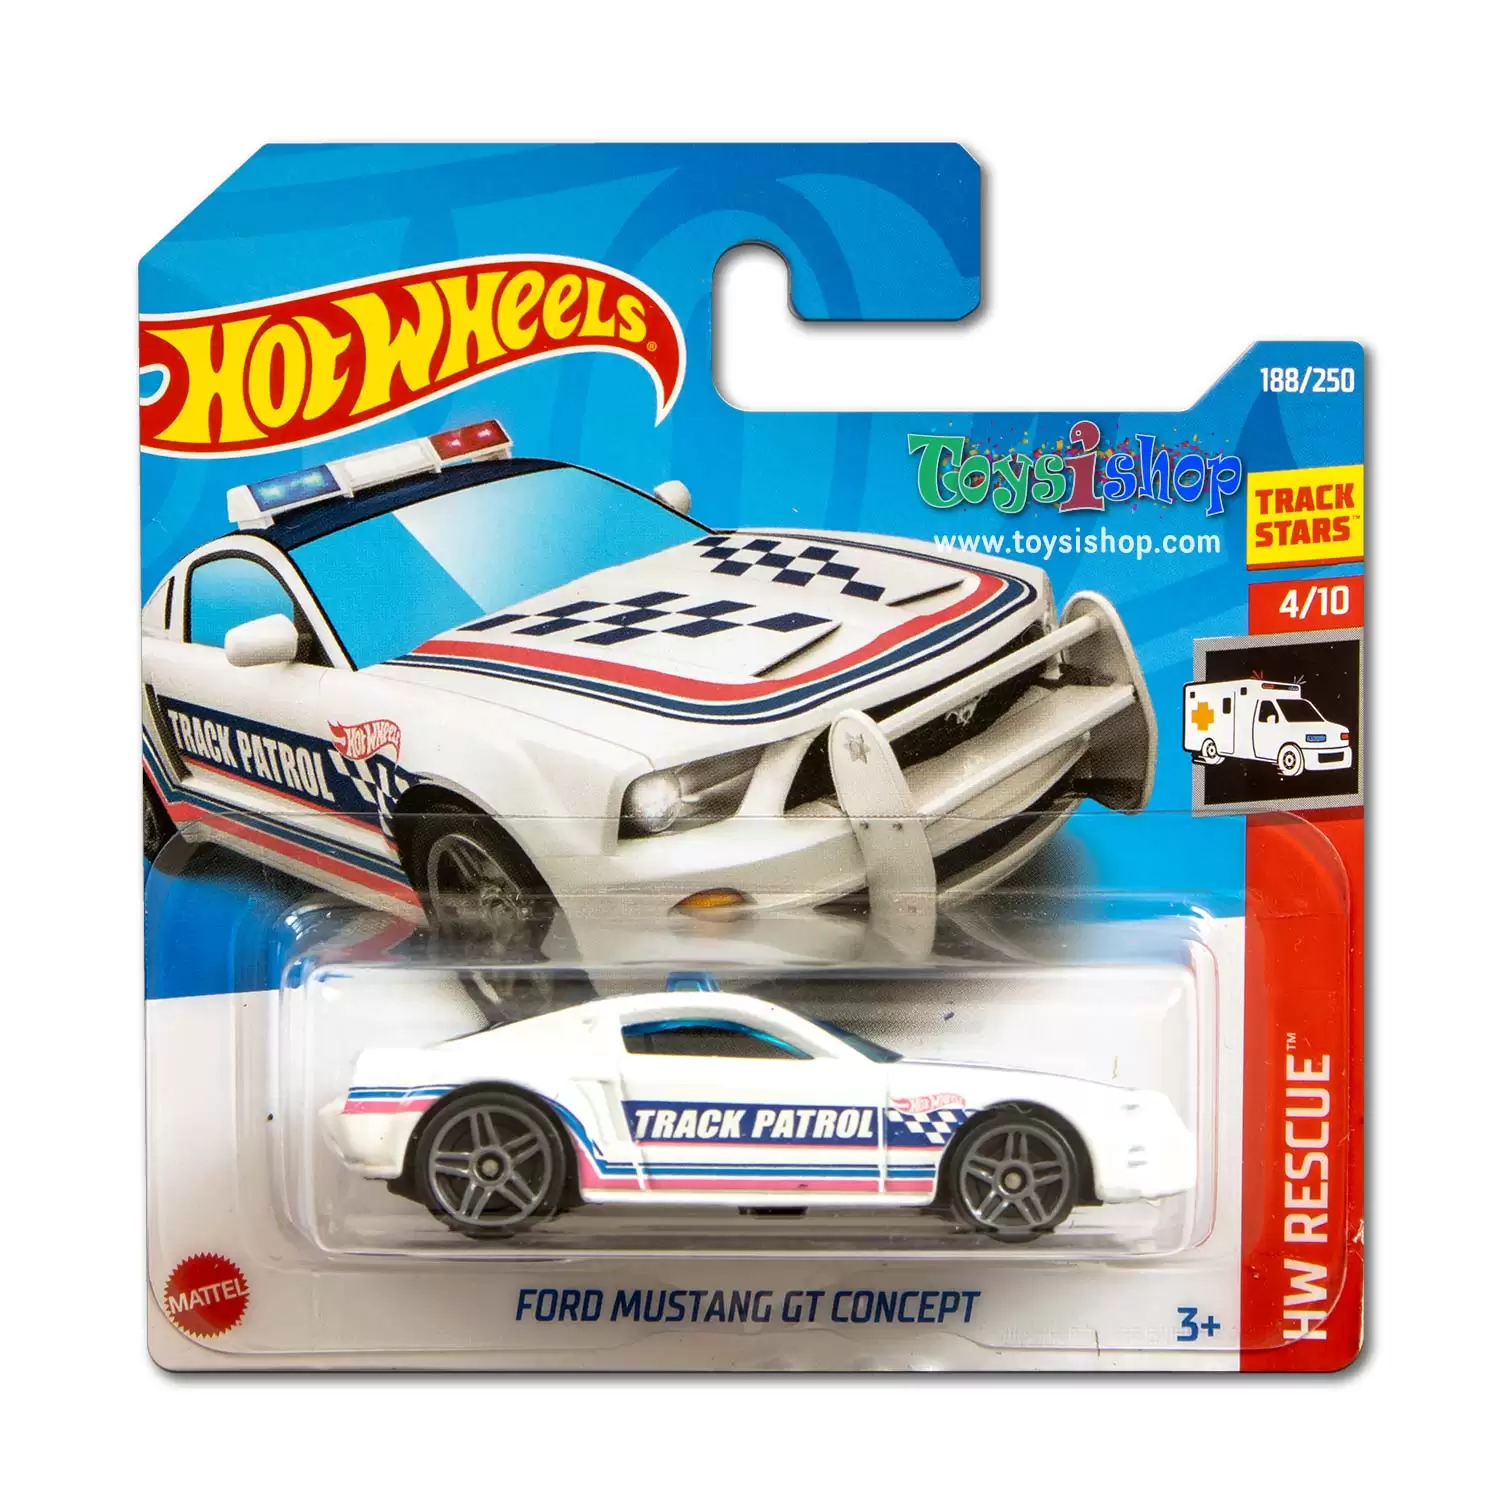 Hot Wheels Ford Mustang GT Concept - Rescue Serisi 188